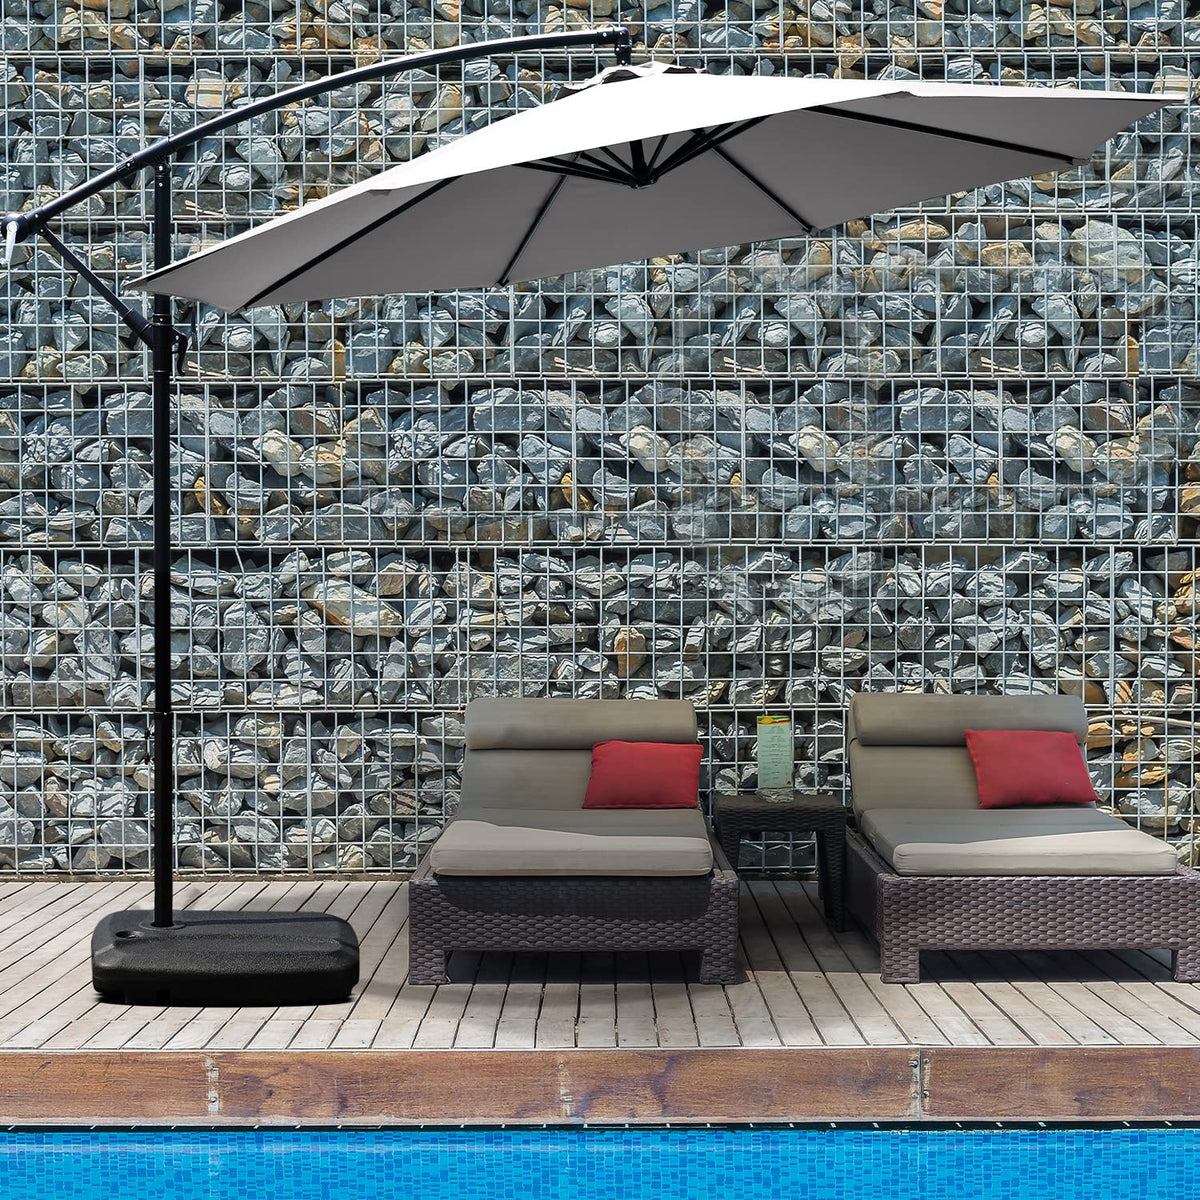 10ft Cantilever Umbrella with Detachable Base - Charcoal Gray